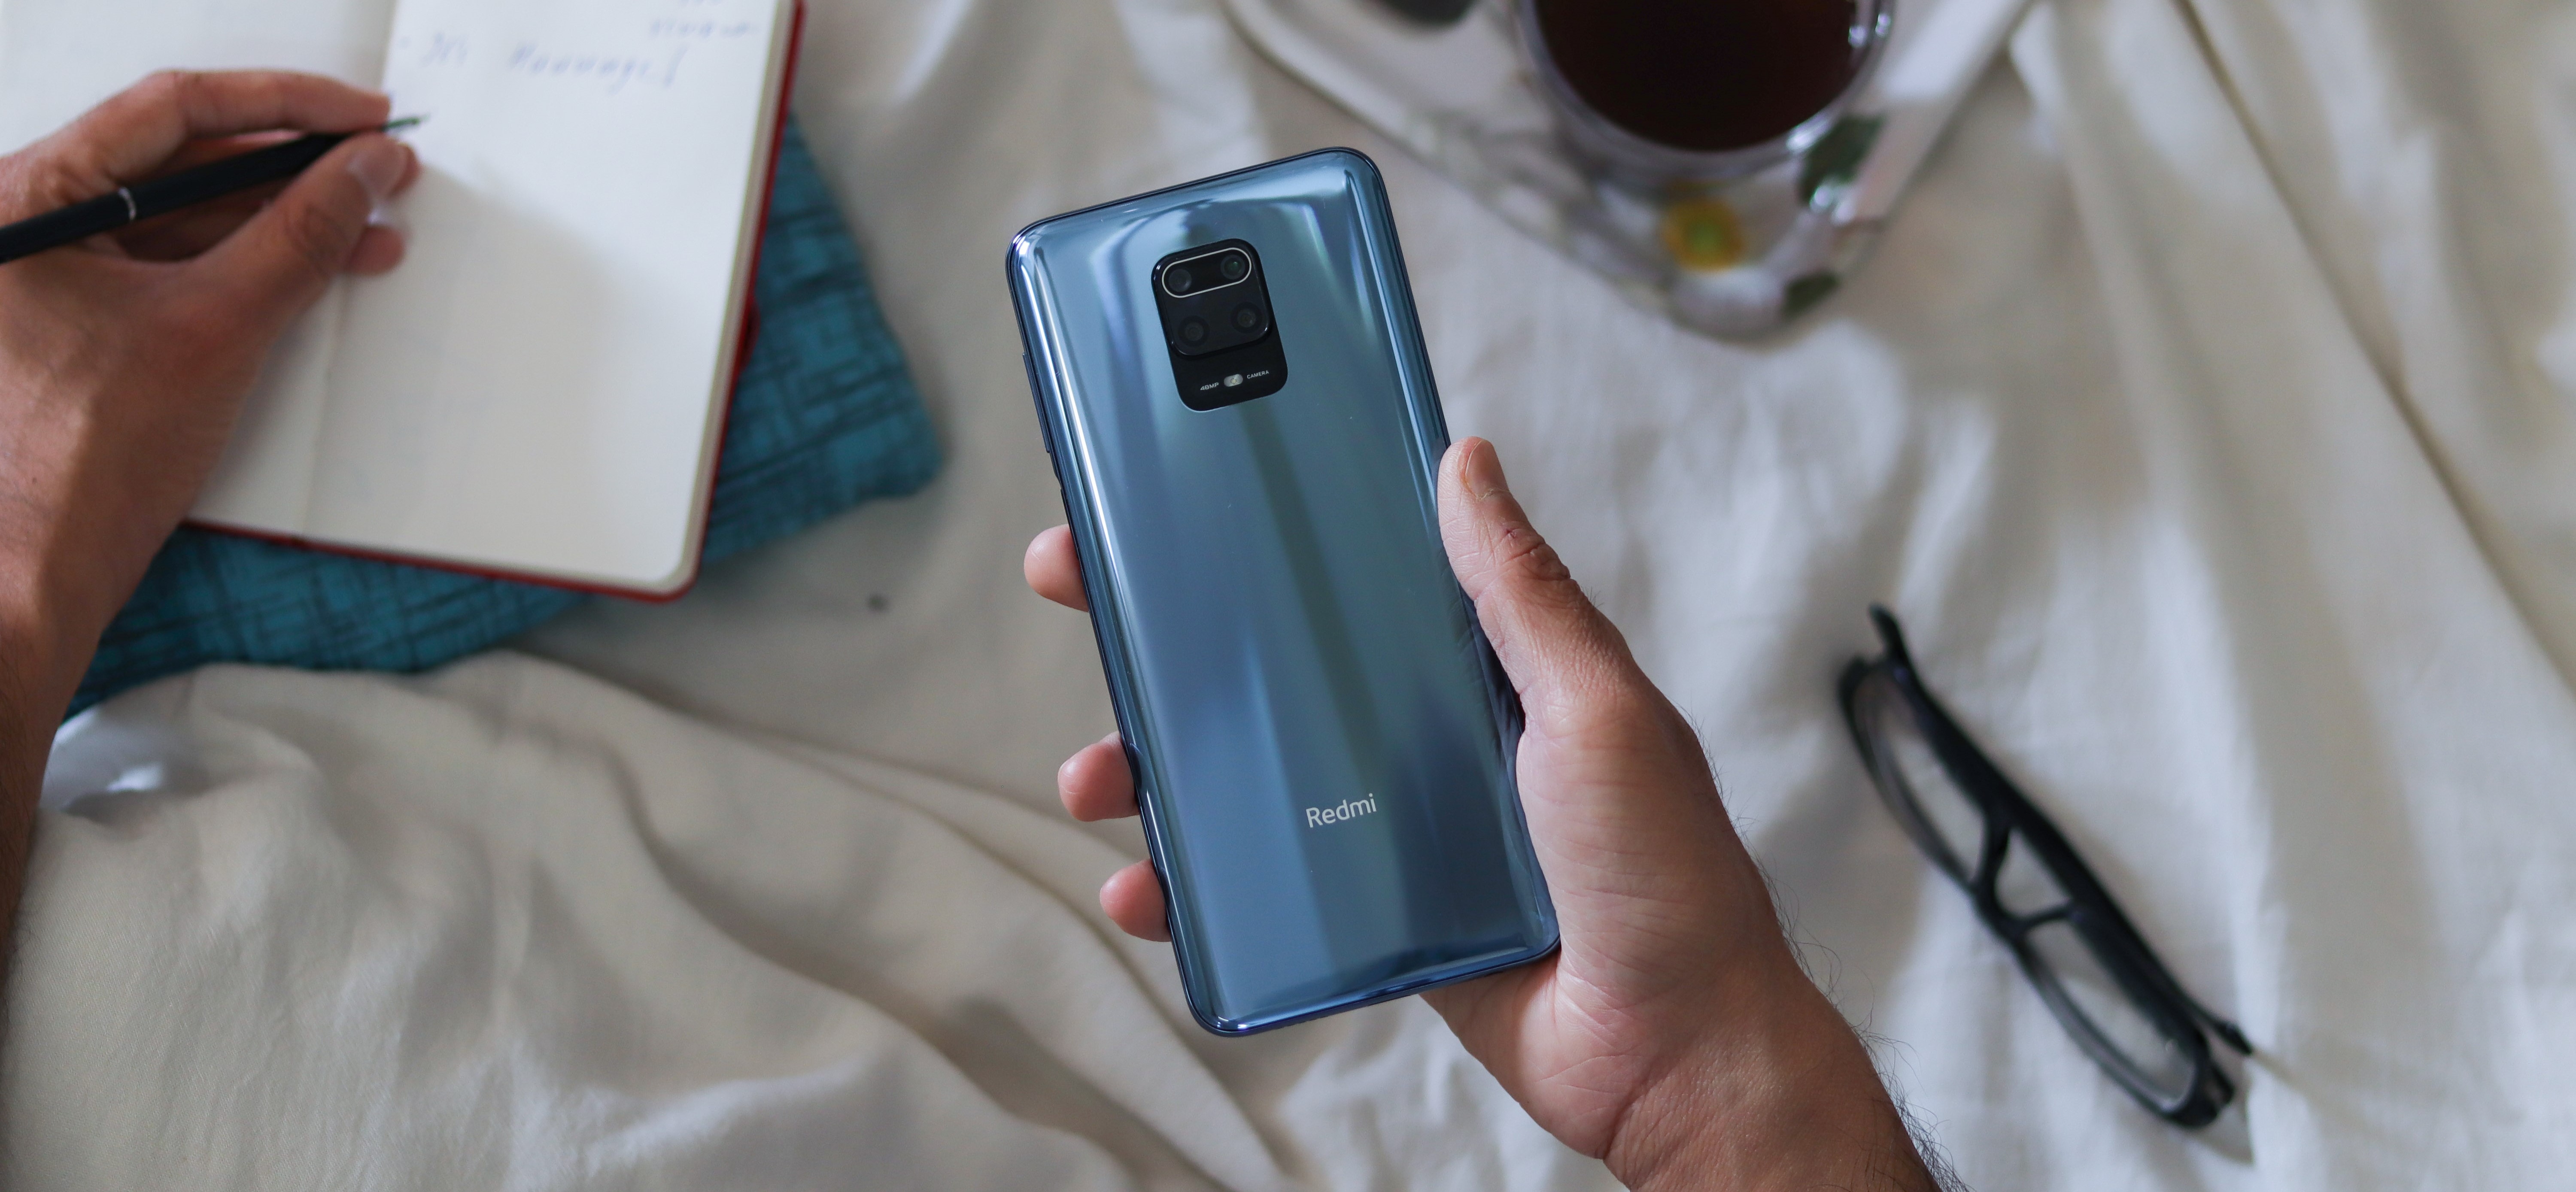 Xiaomi Redmi Note 9S review: a new champion budget phone - our